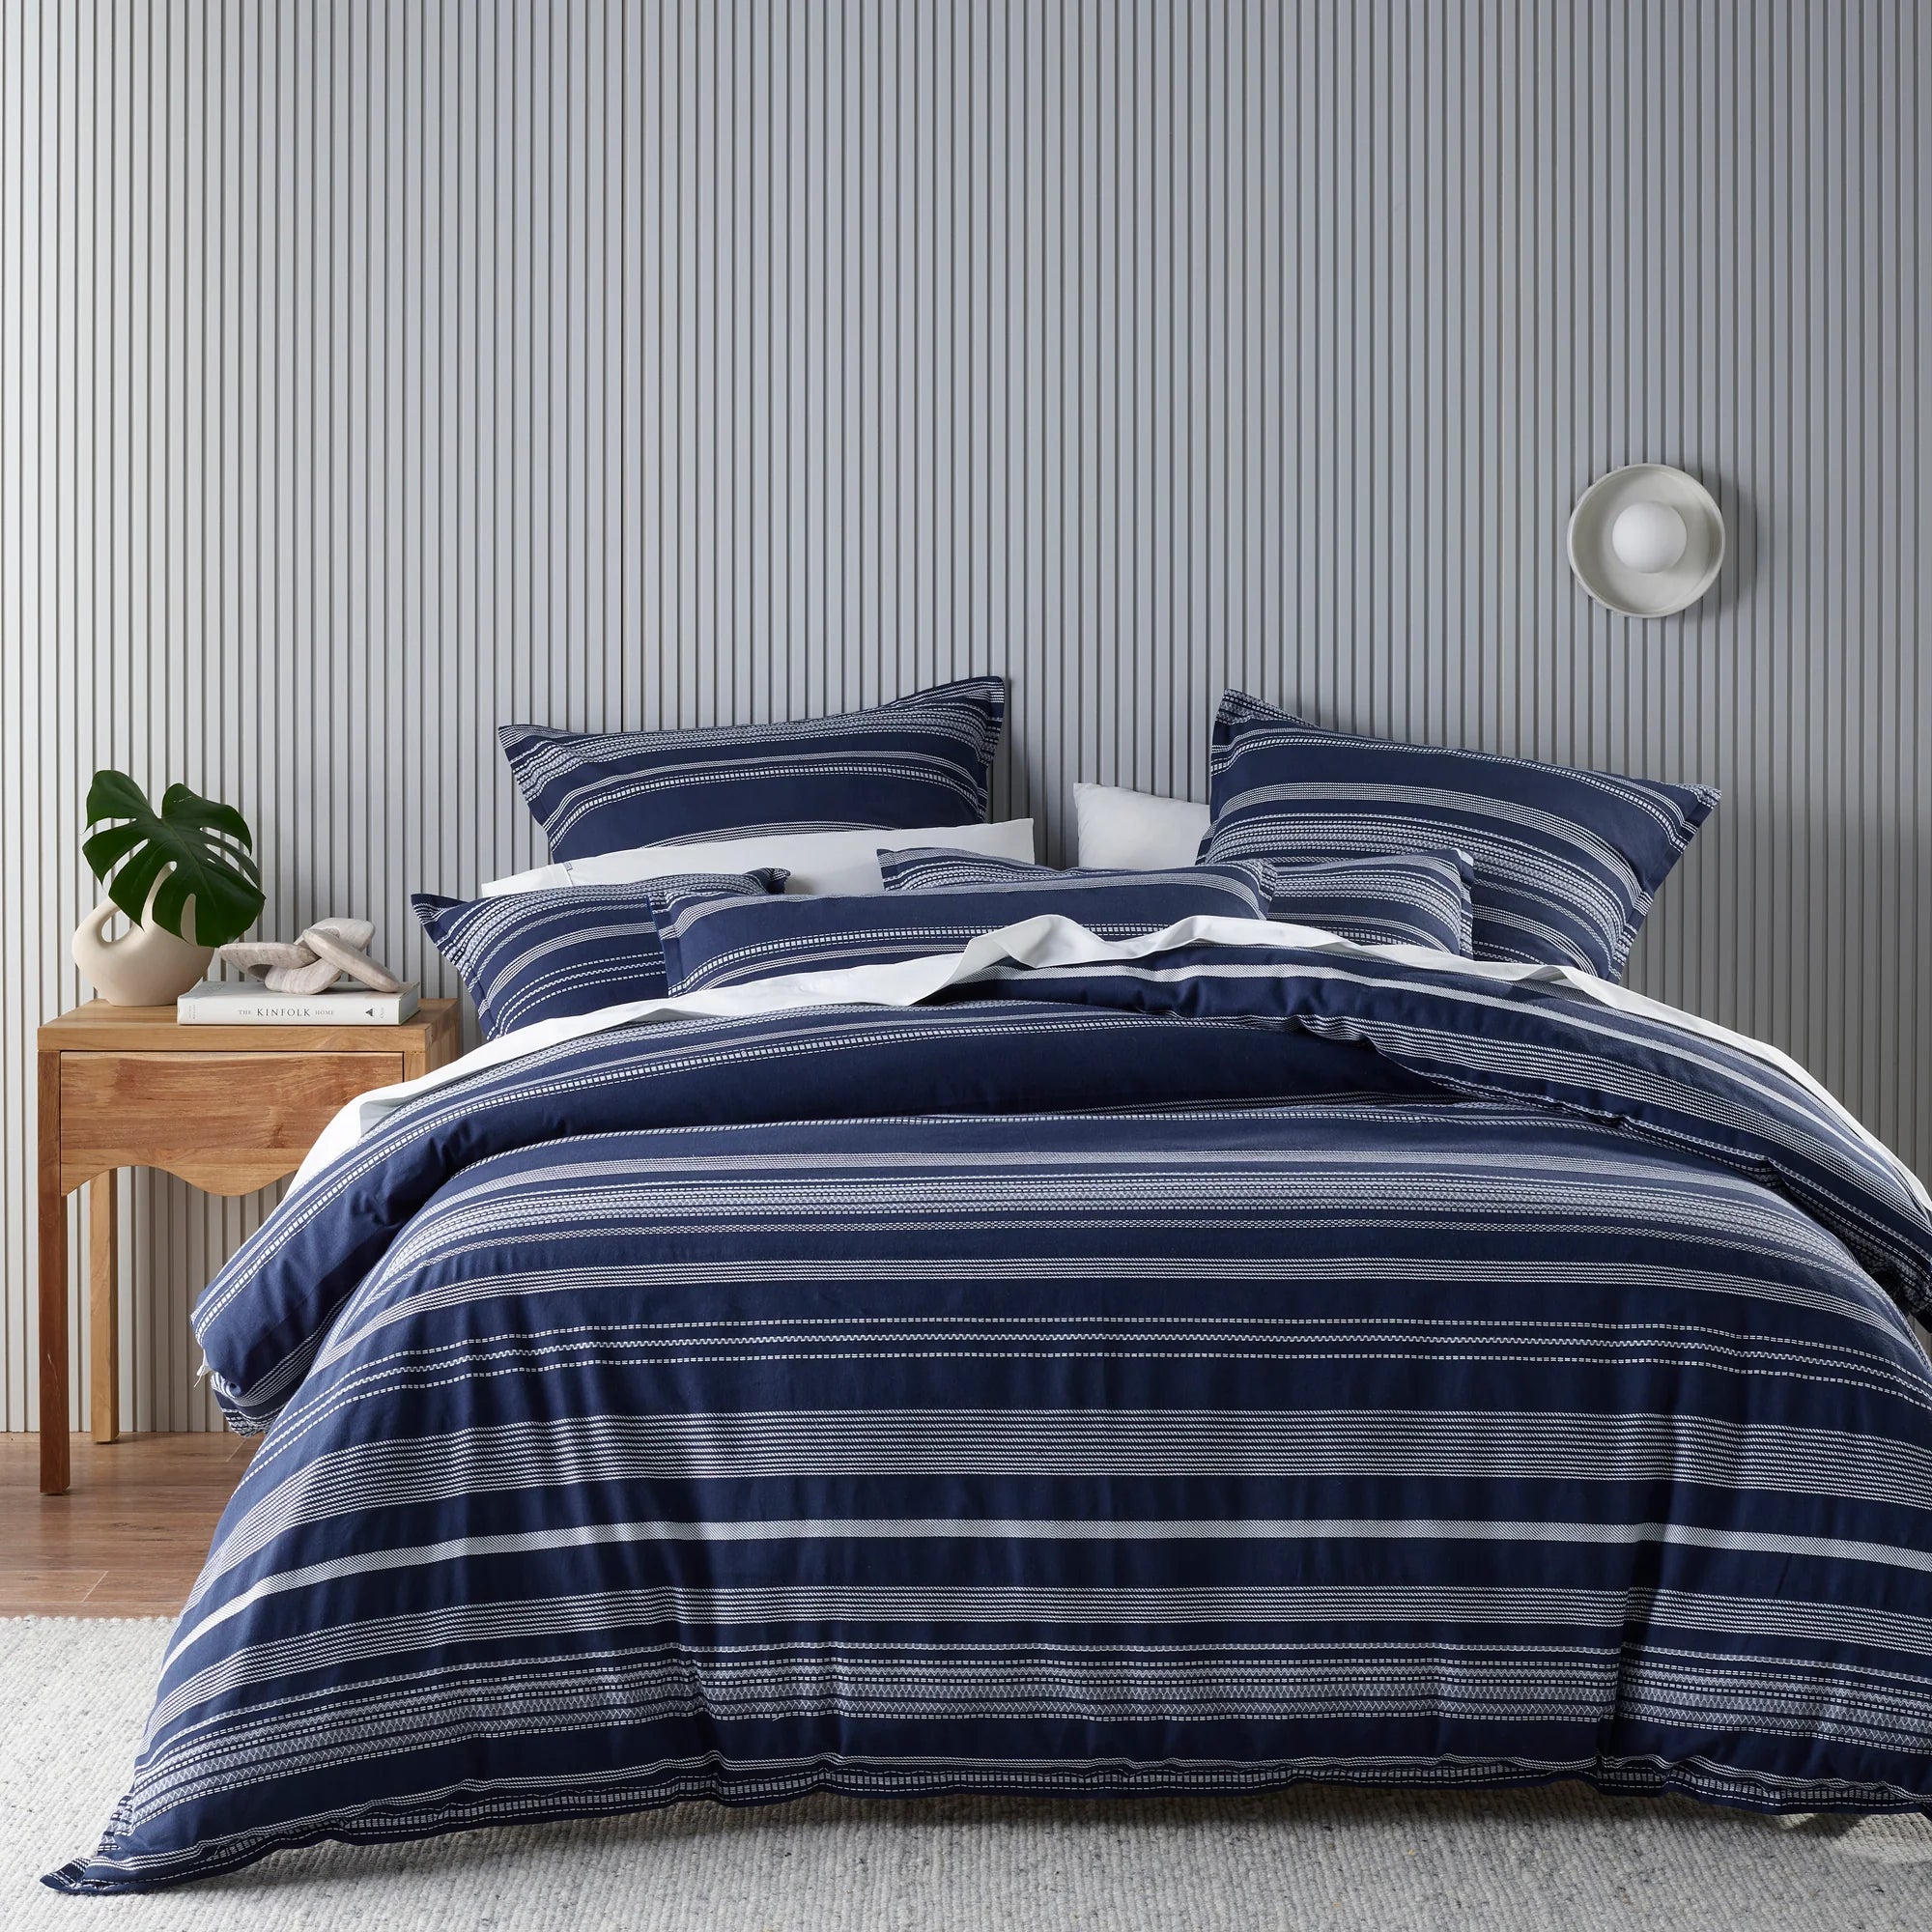 Instantly relax this winter with Regent. A luxuriously textured cotton fabric that is dyed in an elegant navy-blue colour with contrast woven white stripes. Complete the look with our matching european pillowcases and cushions.